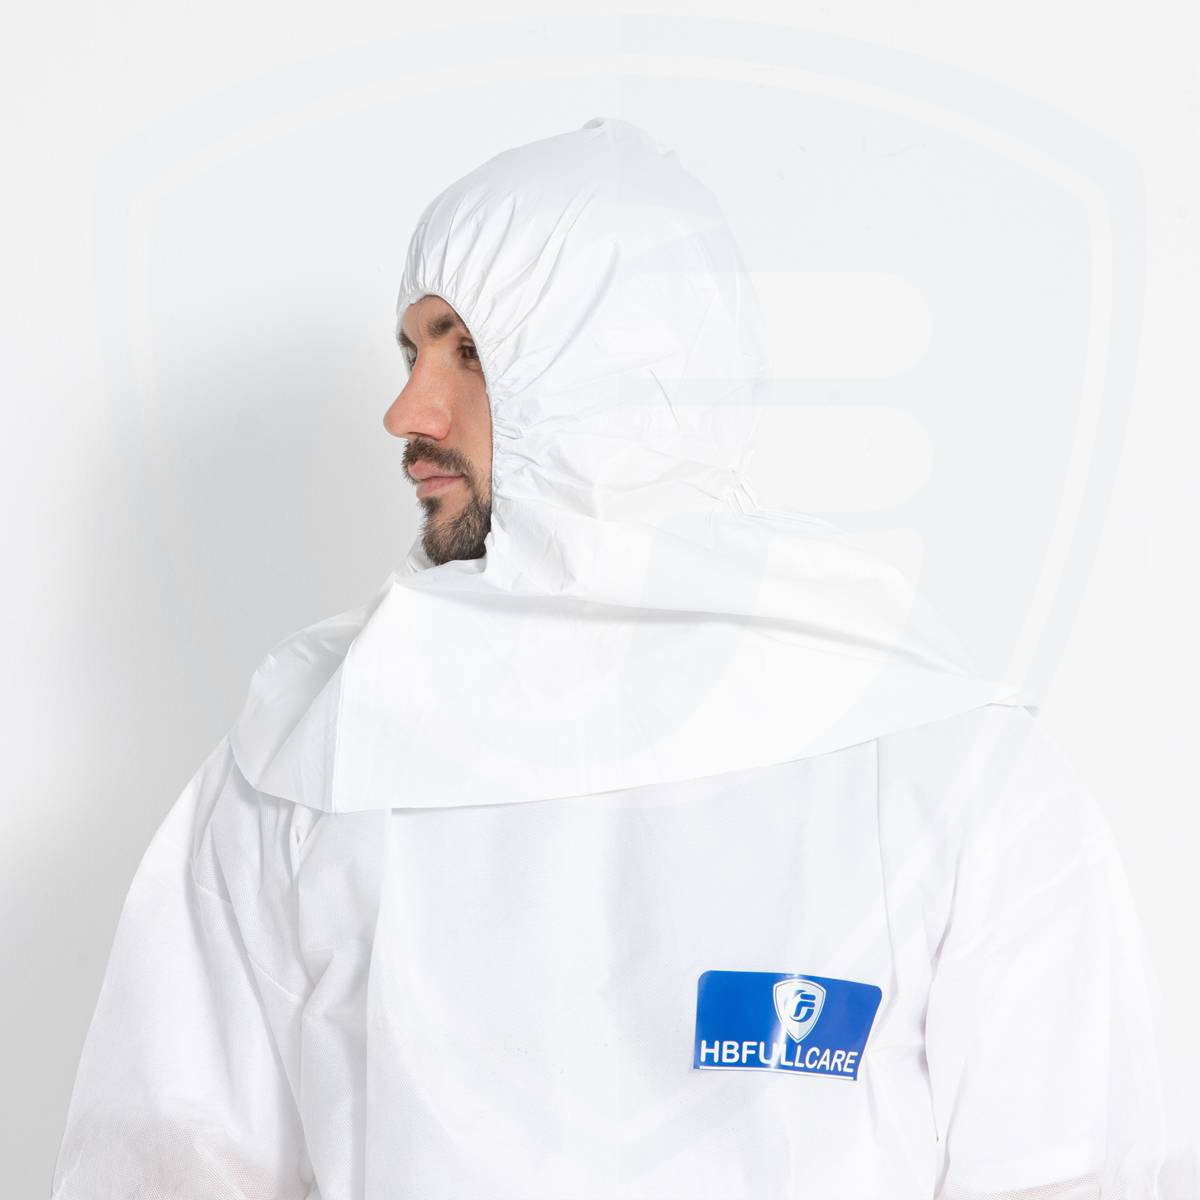 Cheap Price Disposable Astronaut Cap without Mask for Personal Safety